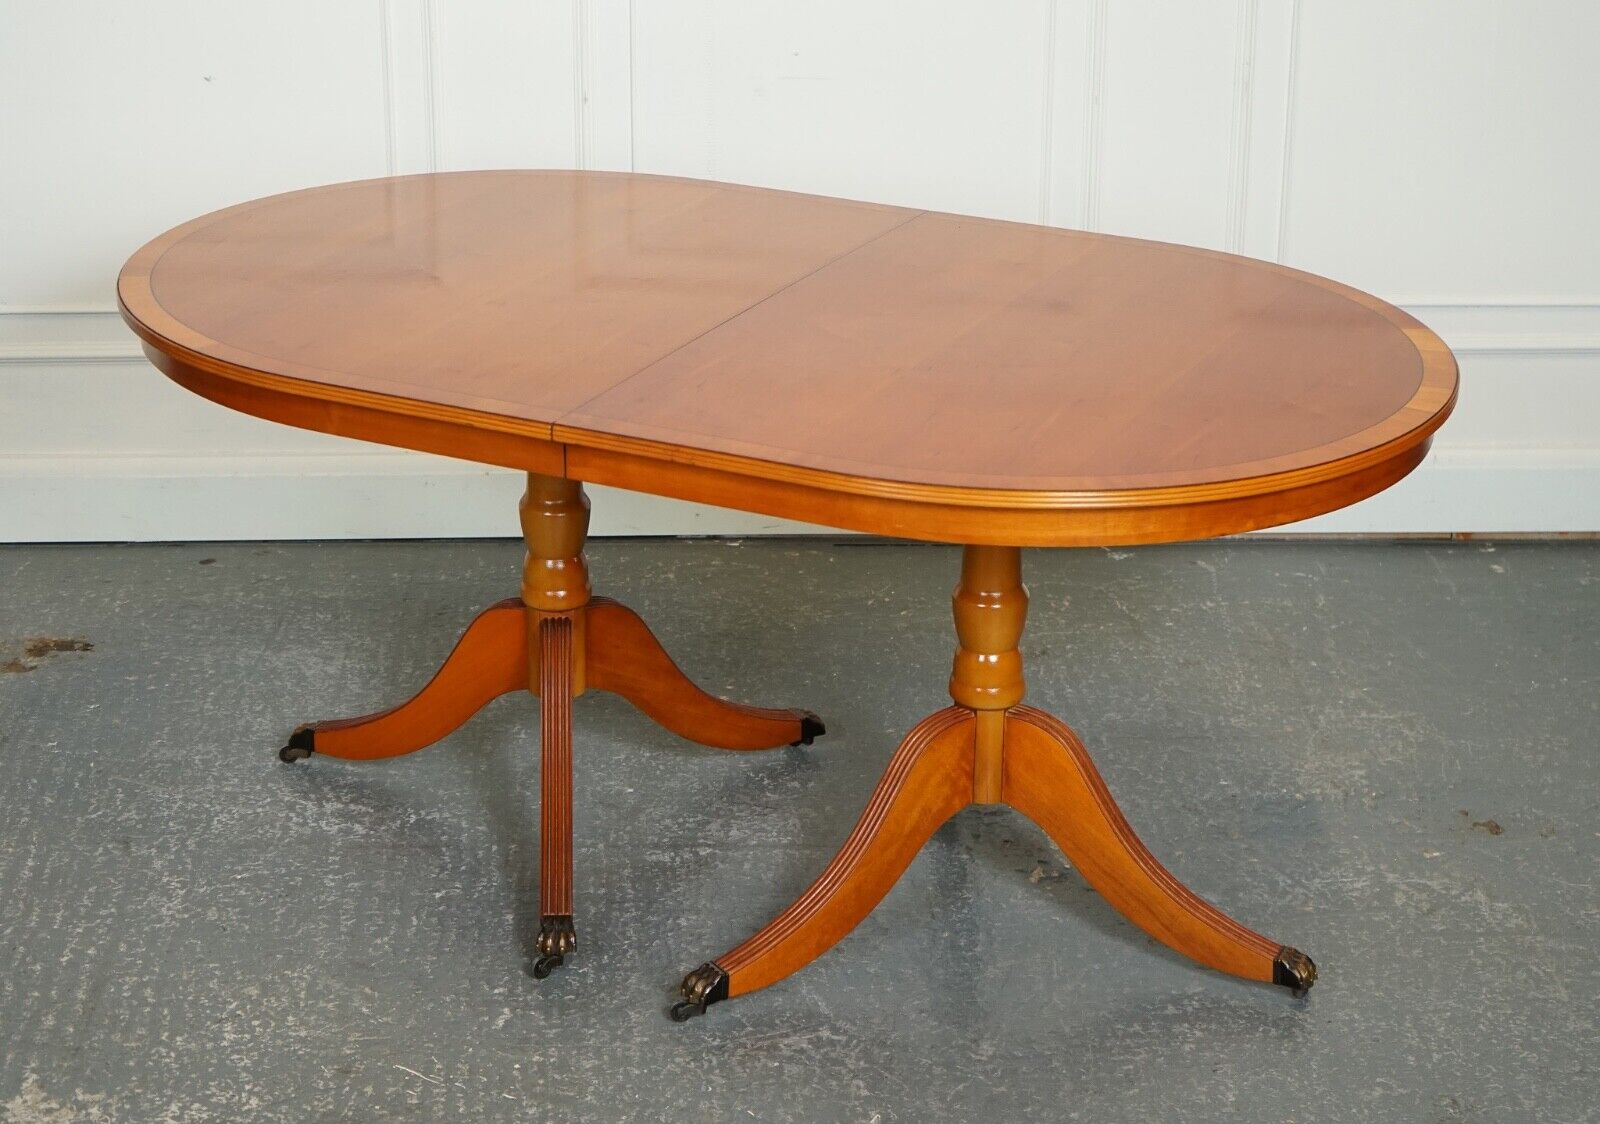 VINTAGE TWIN PEDESTAL YEW WOOD EXTENDING 6-8 SEATING DINING TABLE J1